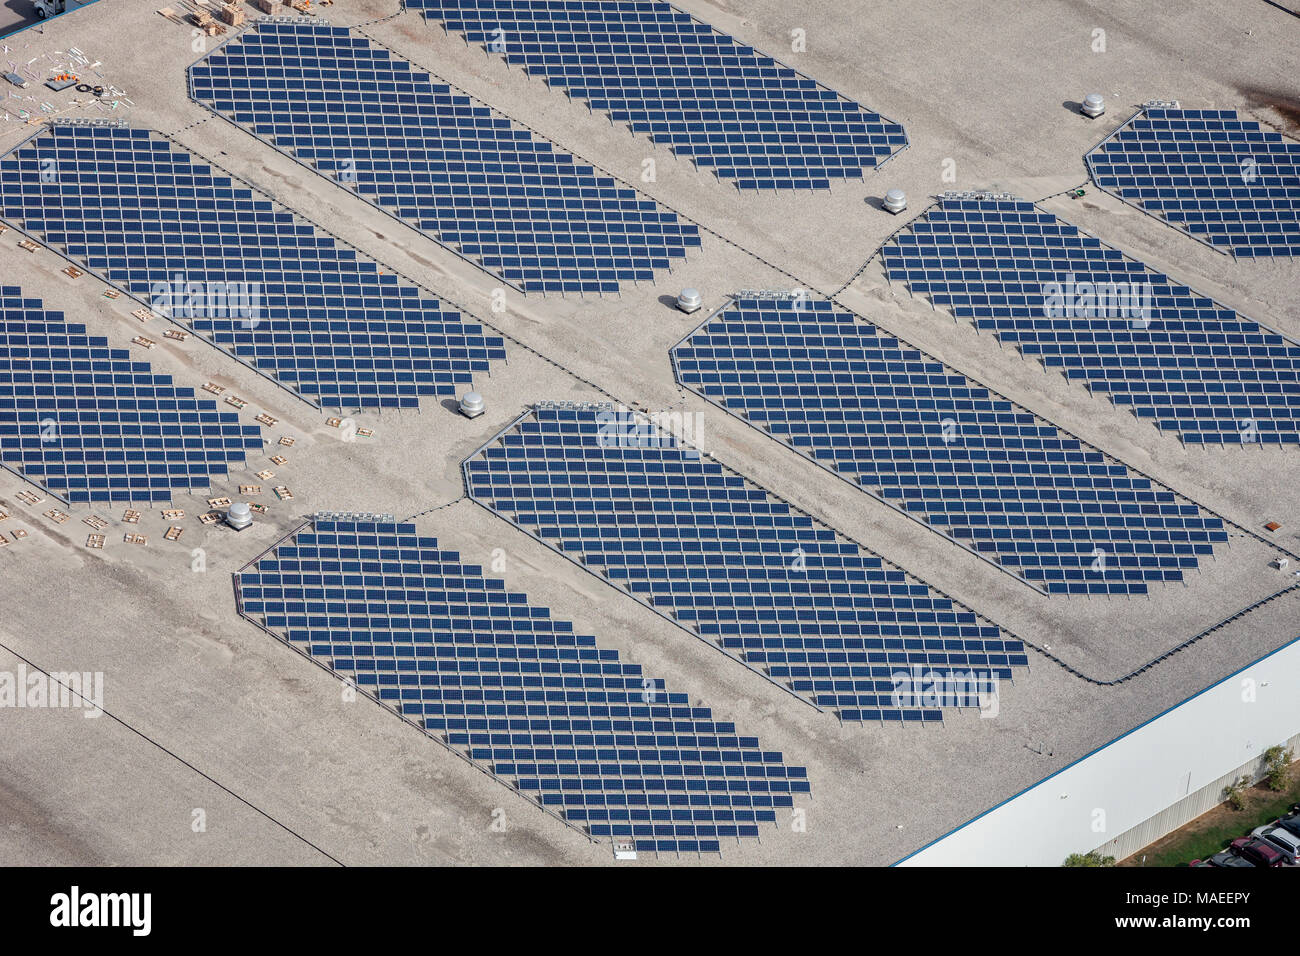 An aerial view of a rooftop commercial building with solar panels. Stock Photo